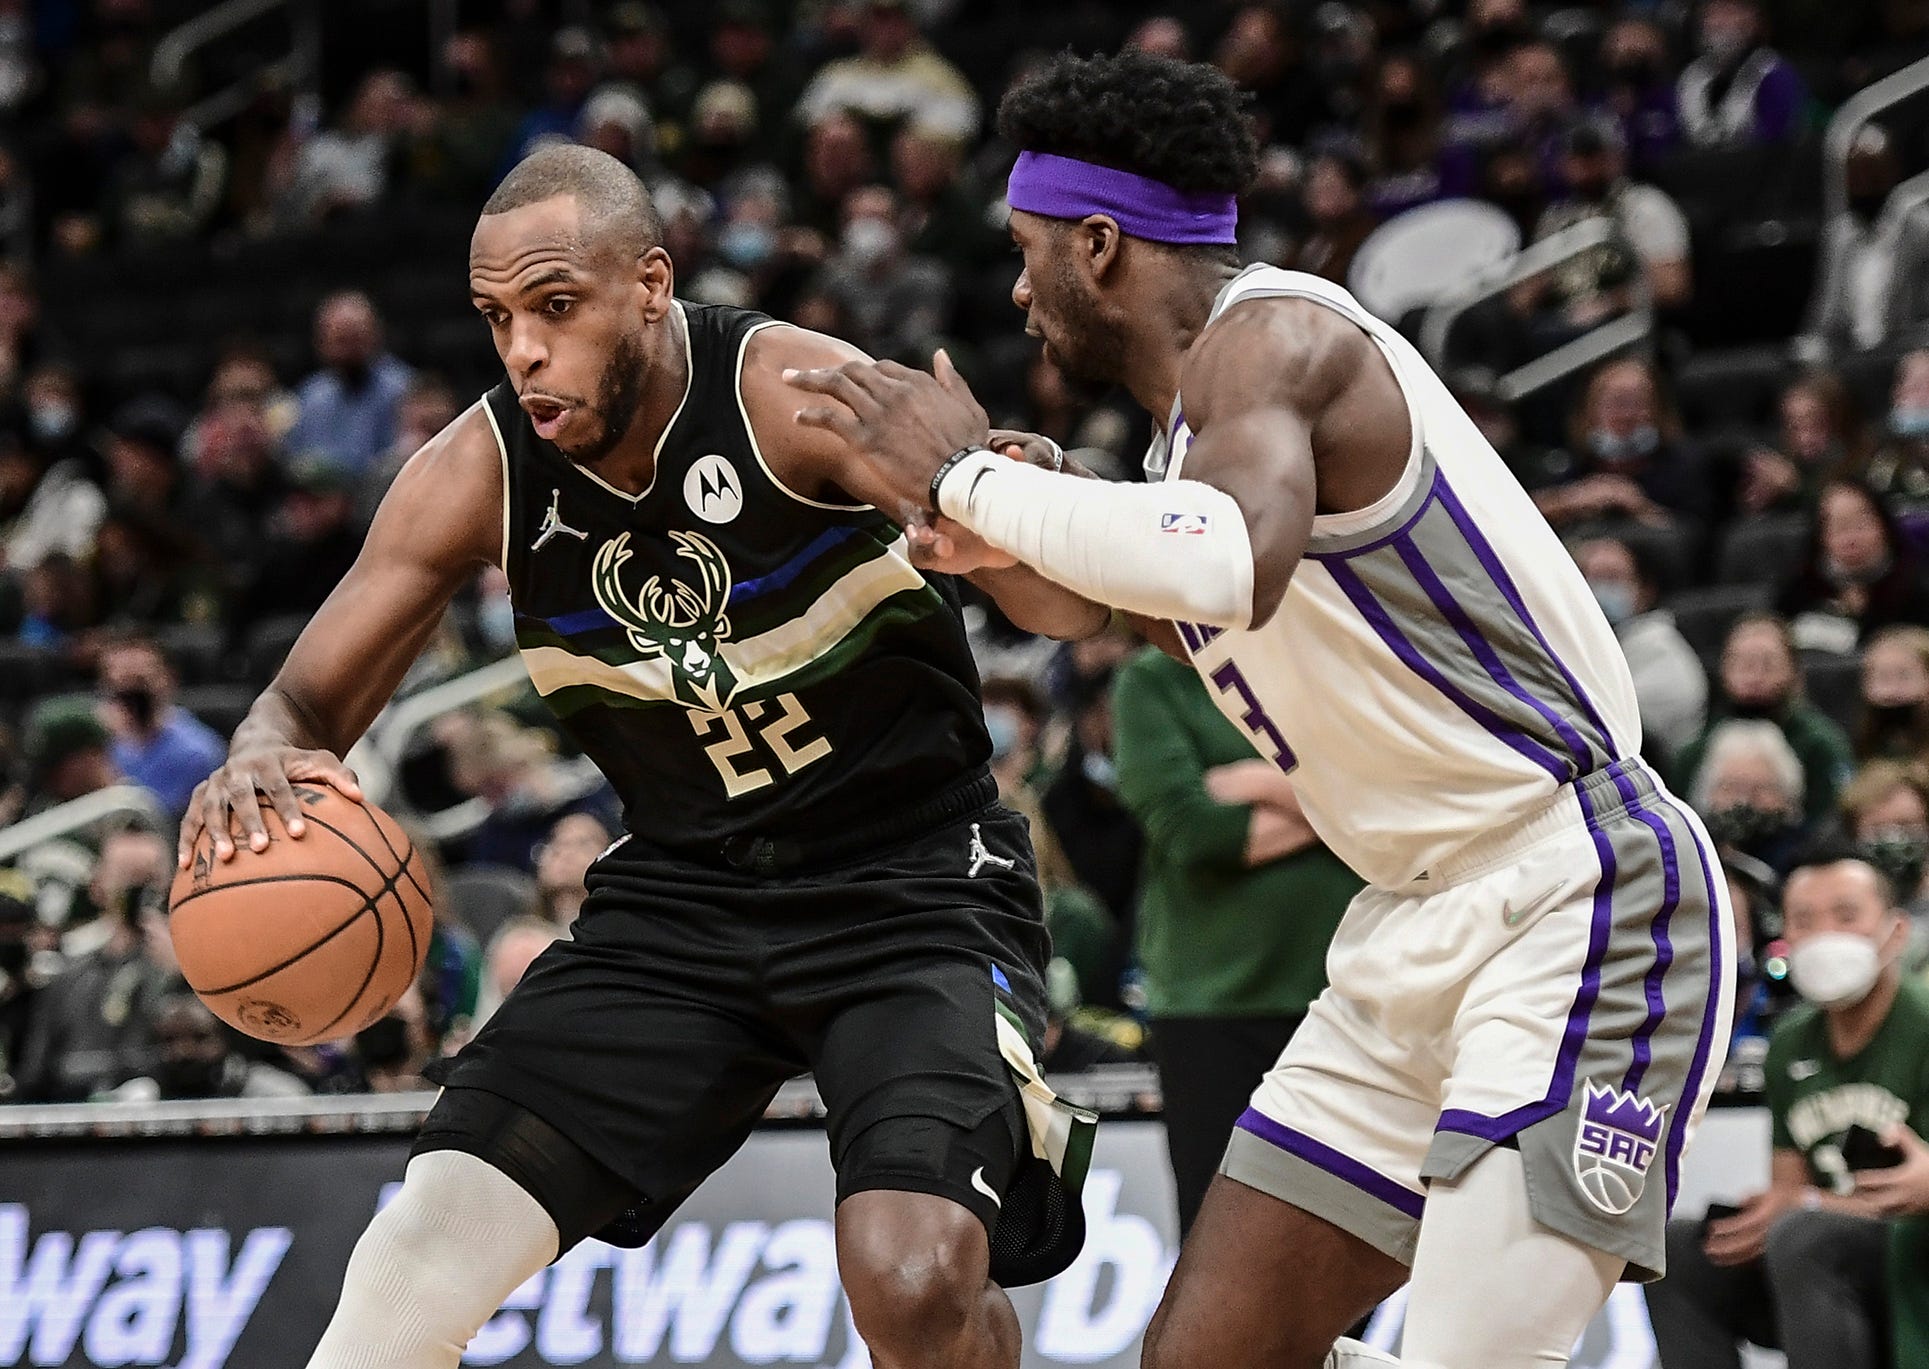 Bucks 133, Kings 127: Hot shooting and DiVincenzo's breakout help Milwaukee hold on